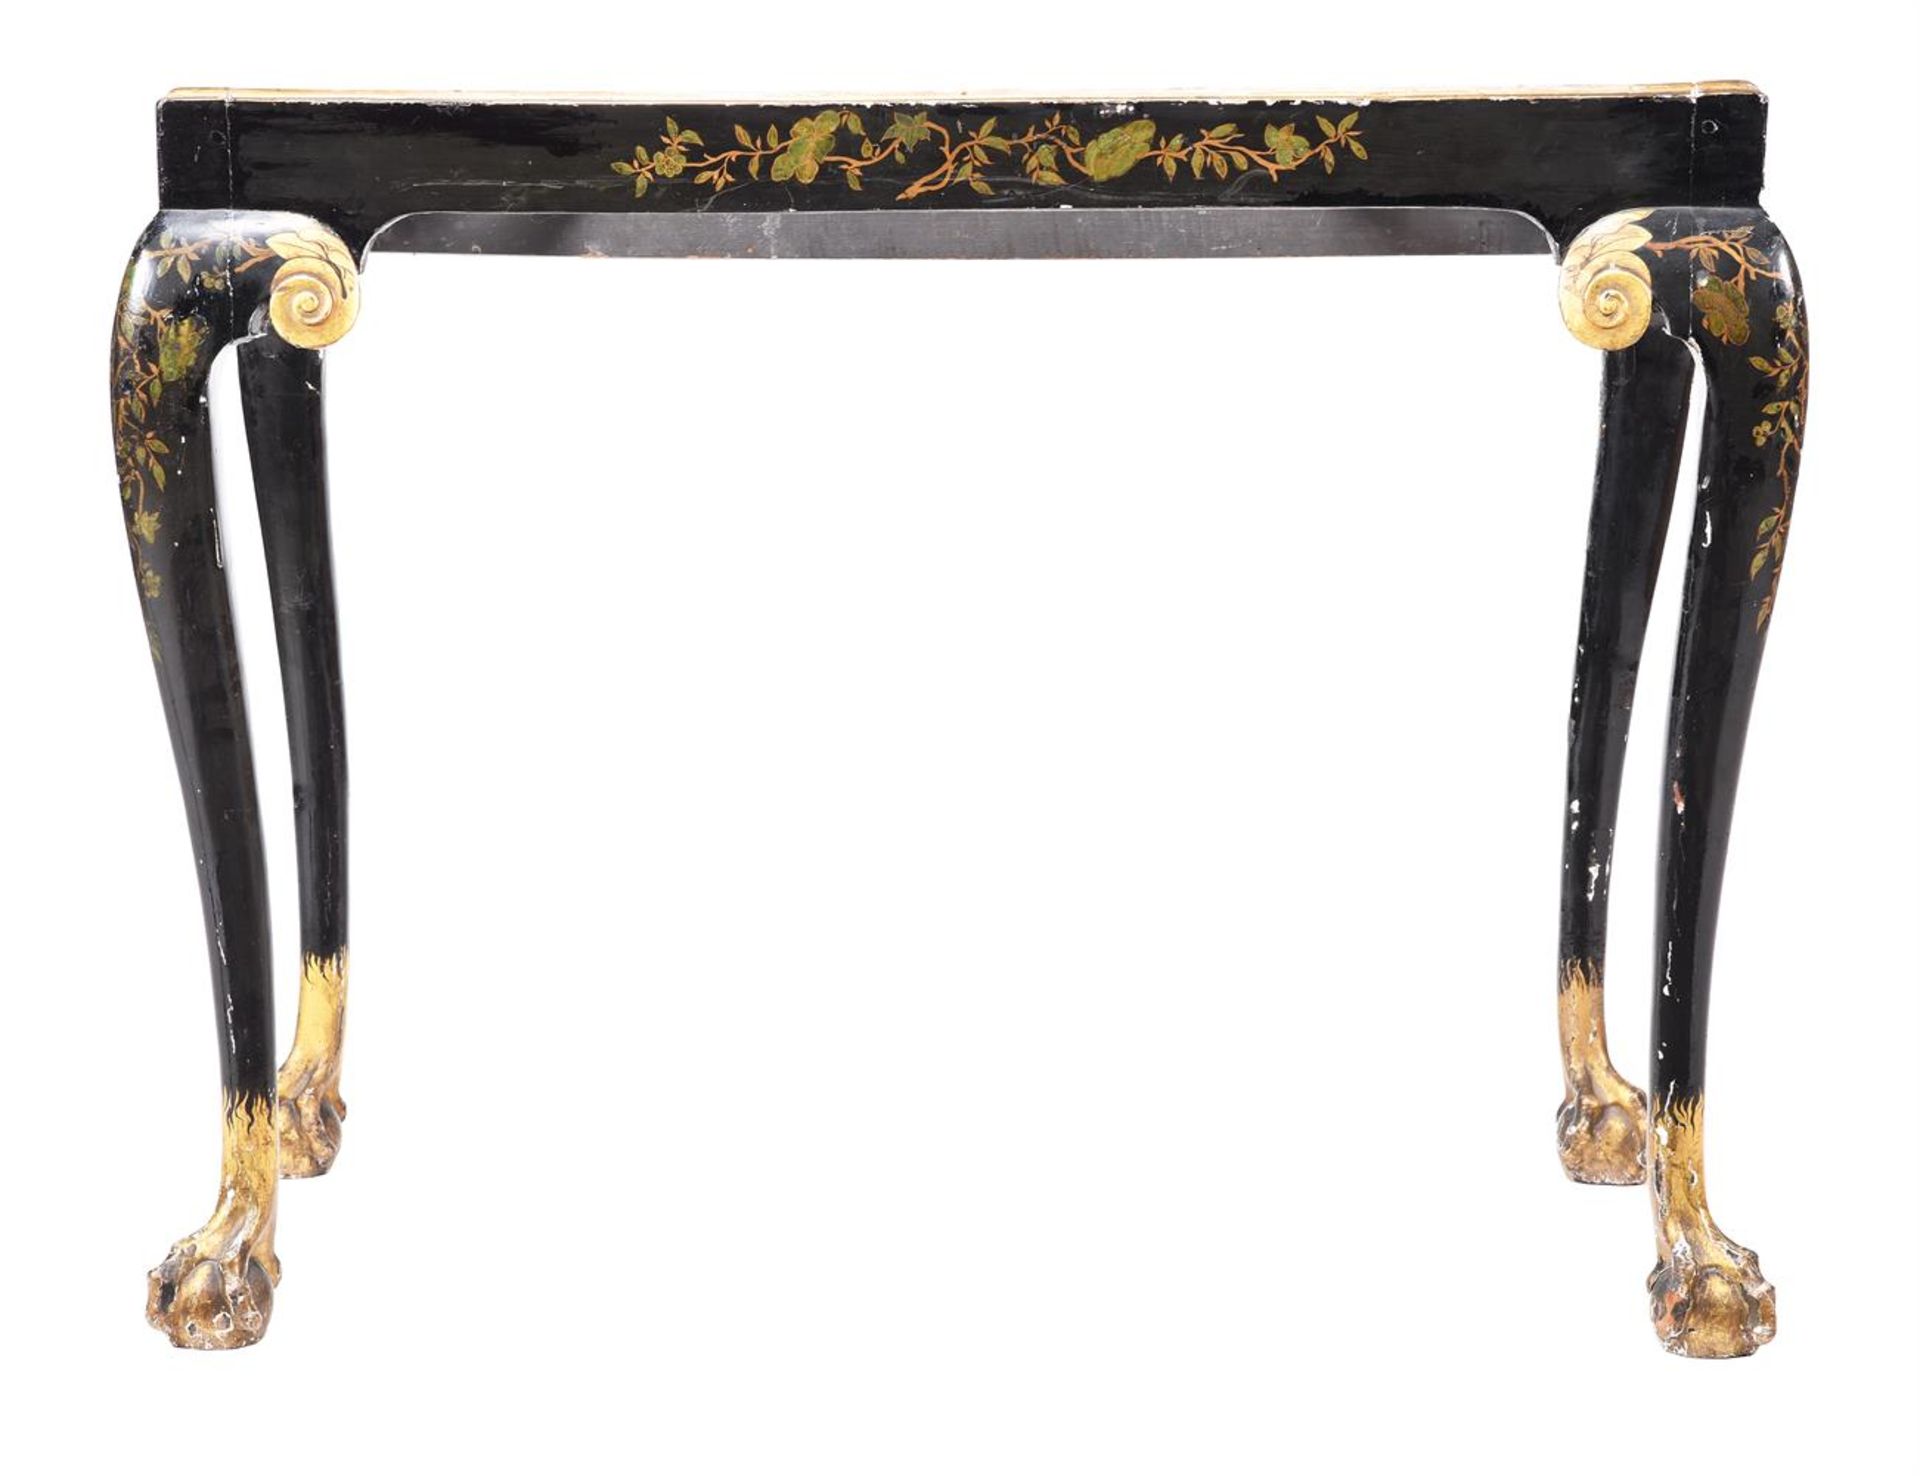 A BLACK LACQUER AND PARCEL GILT STAND